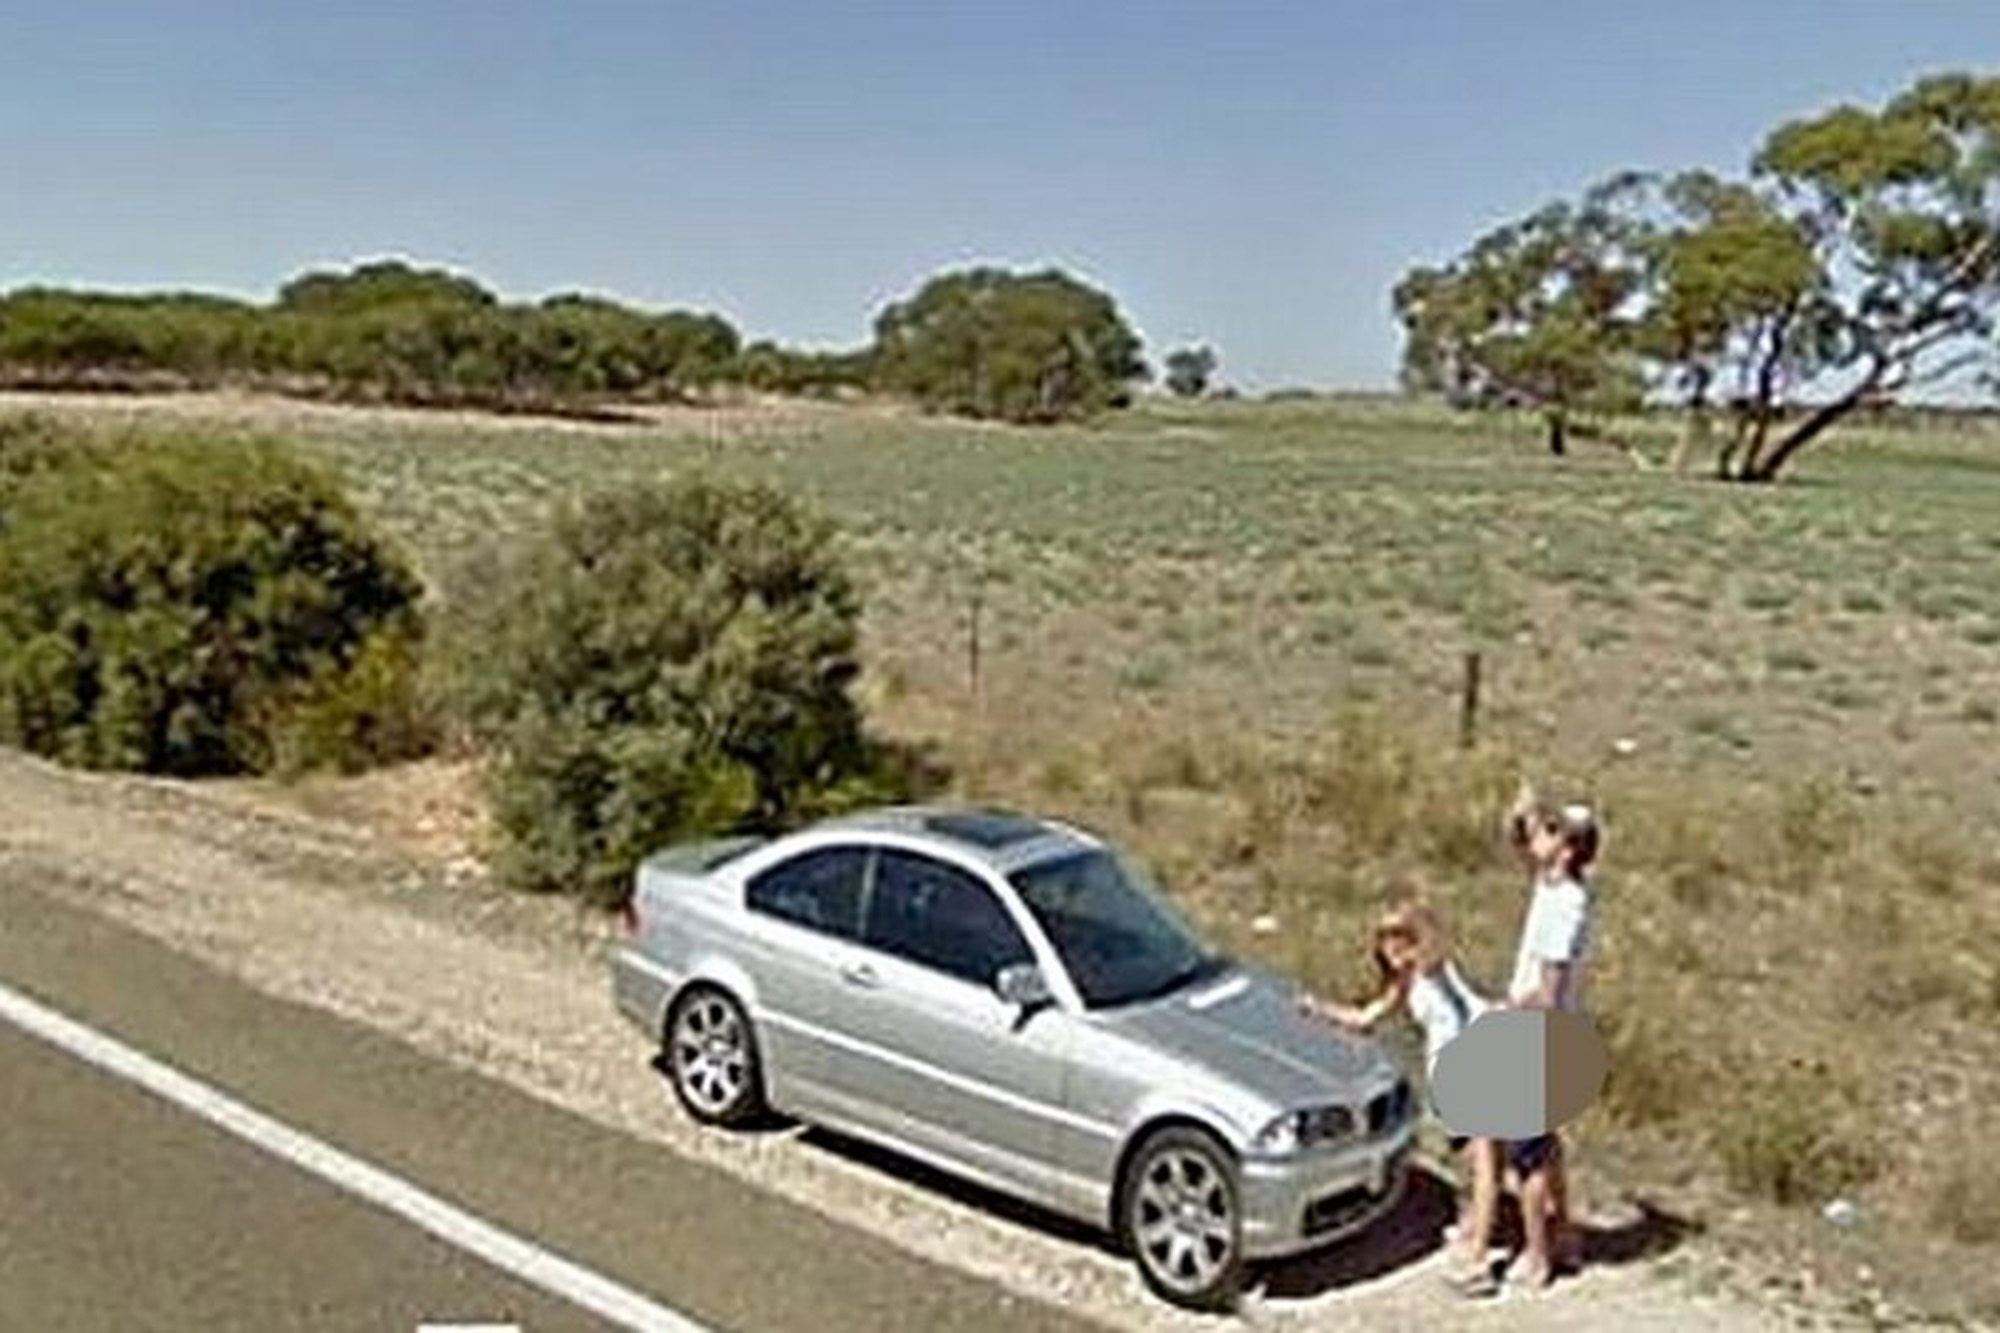 austin guthrie recommends sex on google earth pic